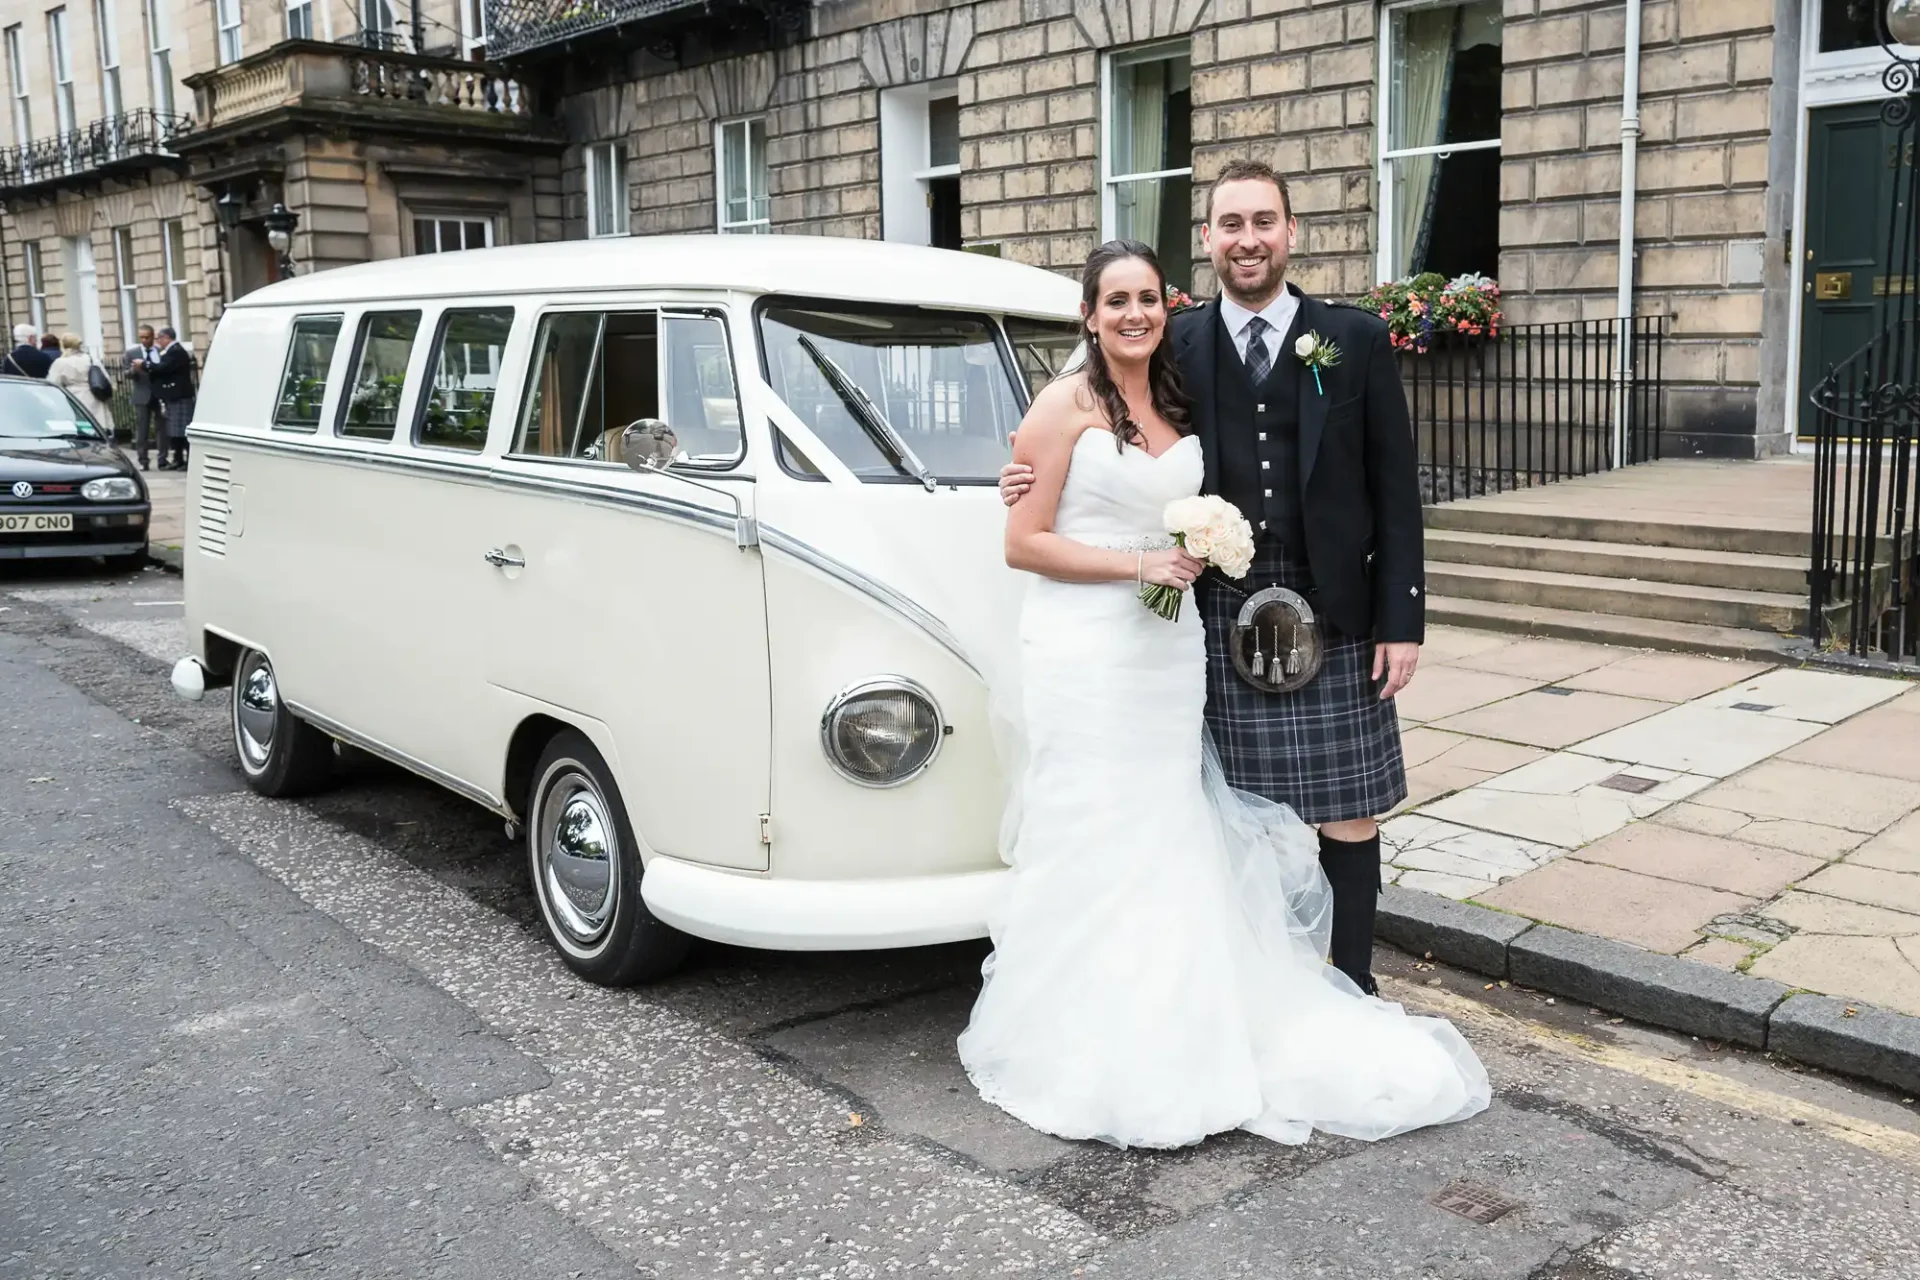 Bride in a white dress and groom in a kilt standing next to a classic white volkswagen van on a city street.